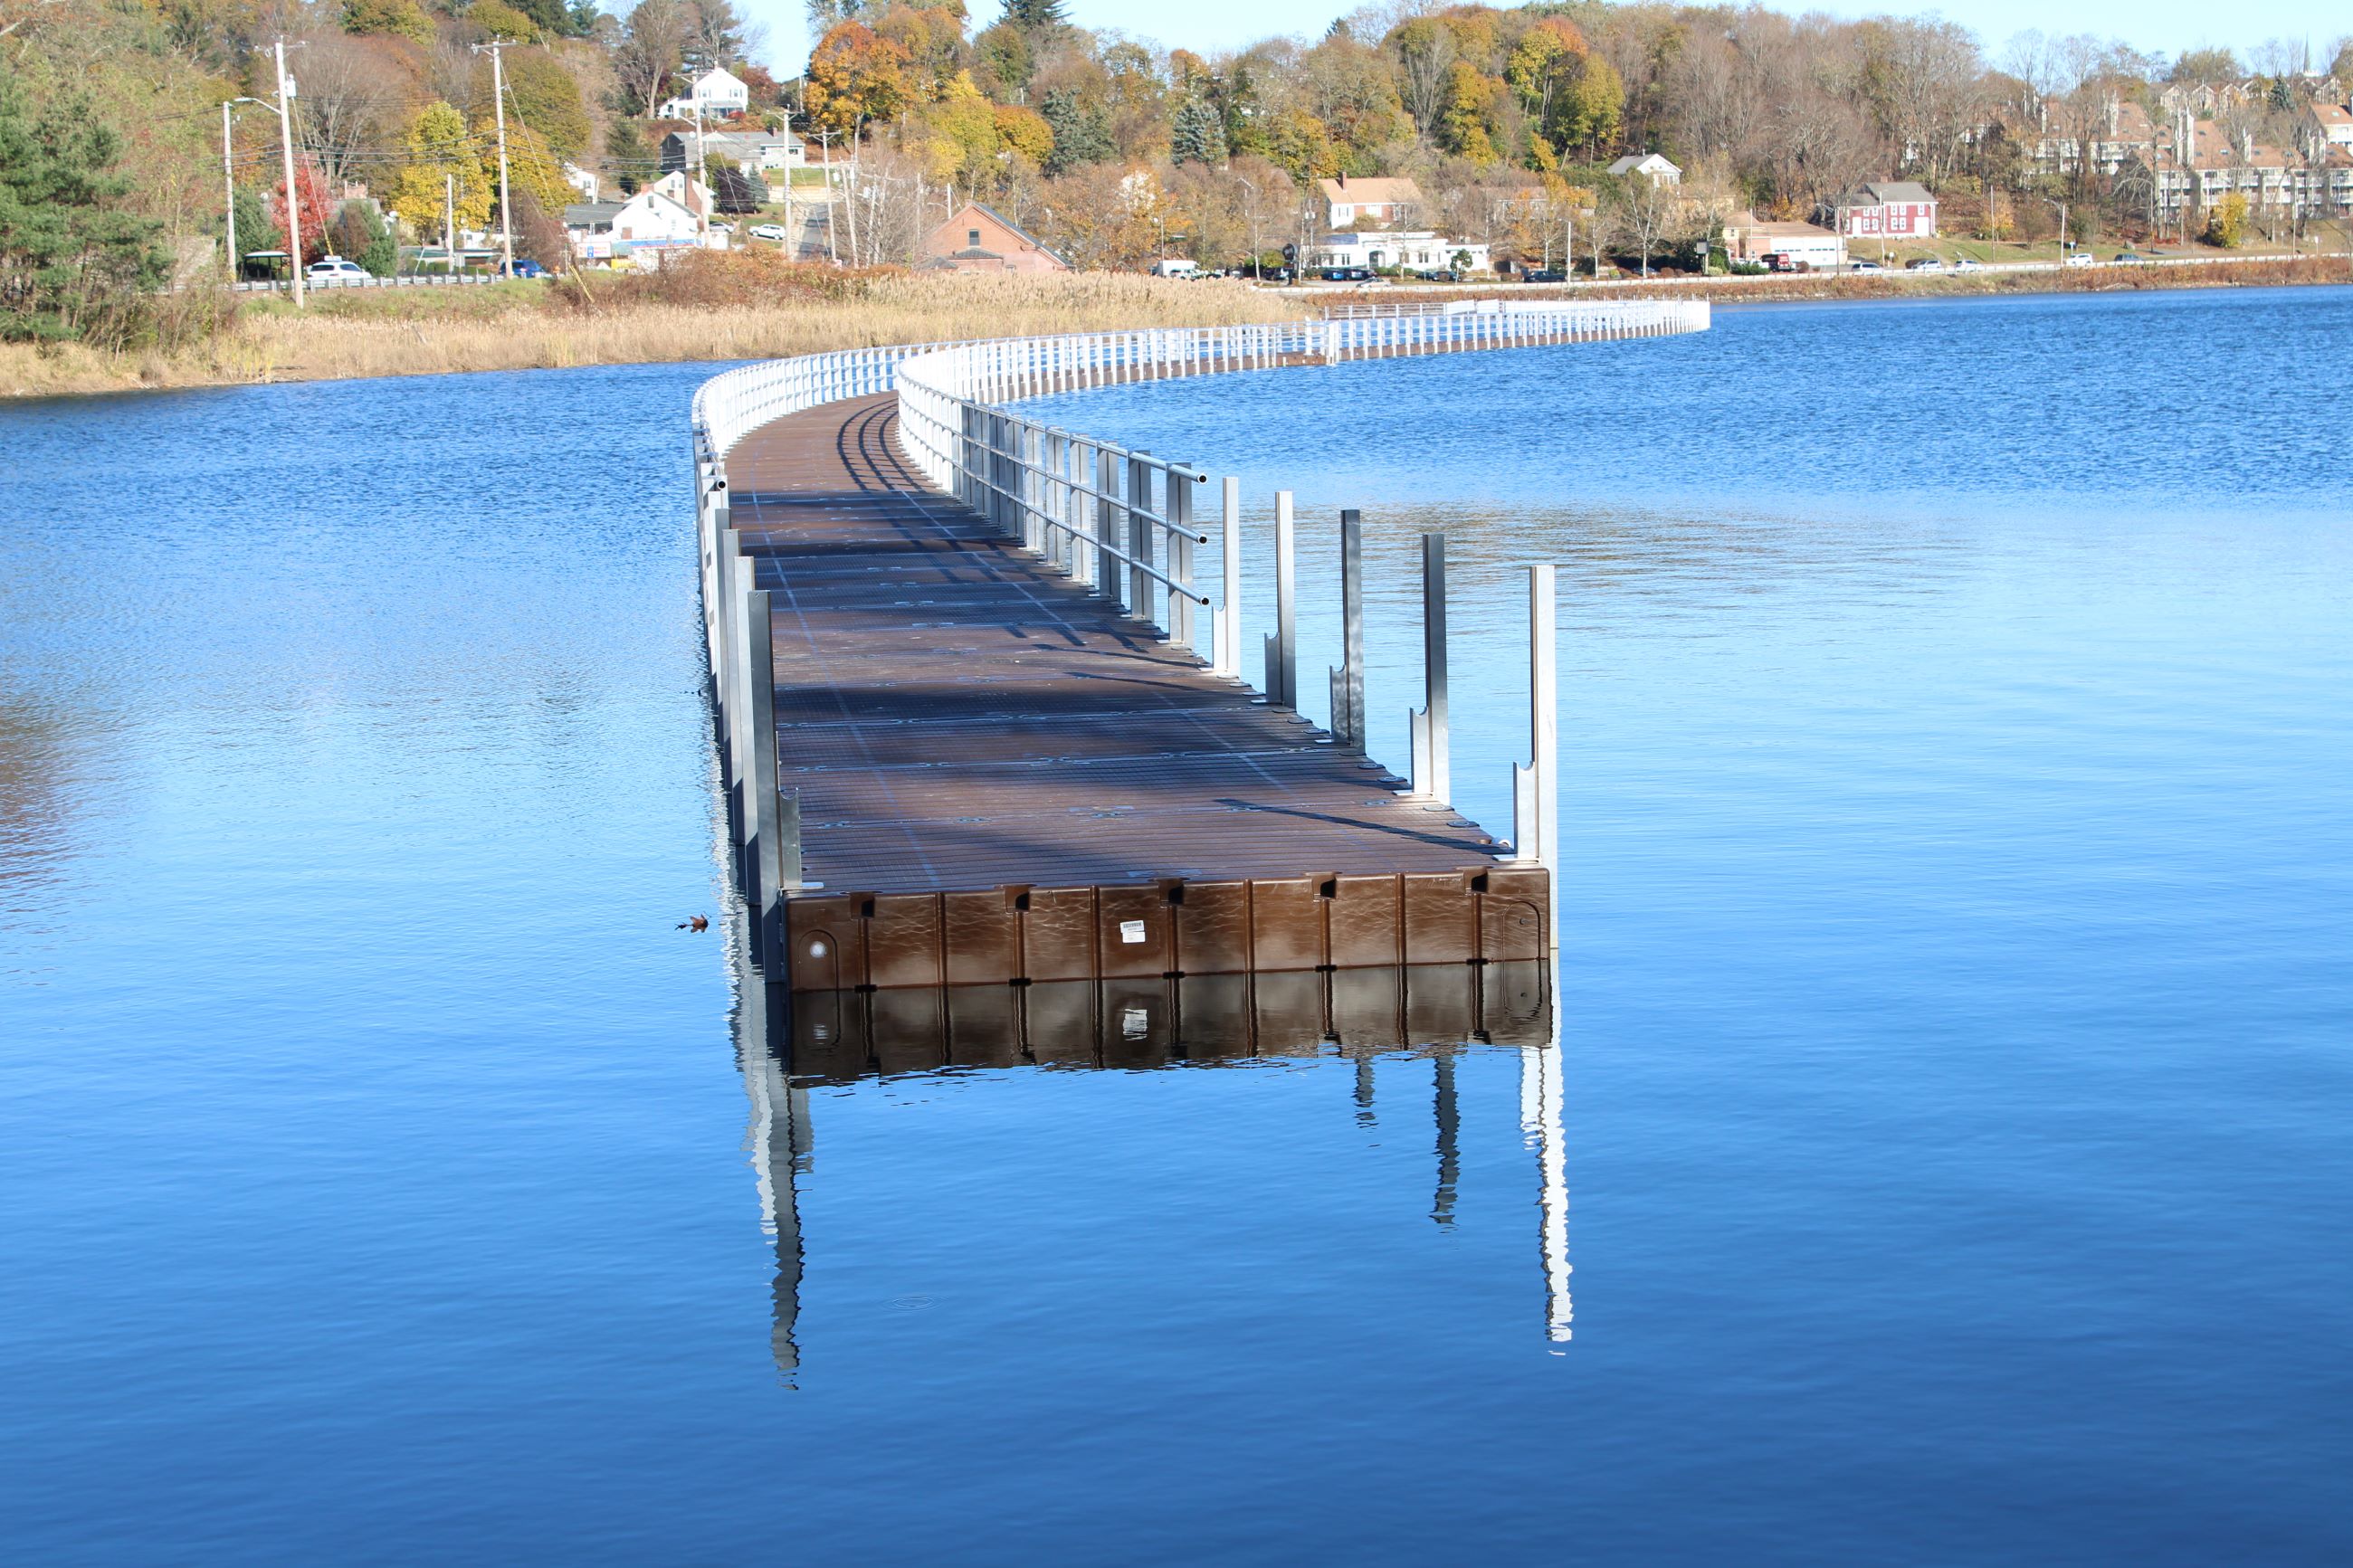 Boardwalk at Lake Williams in Marlborough close to completion